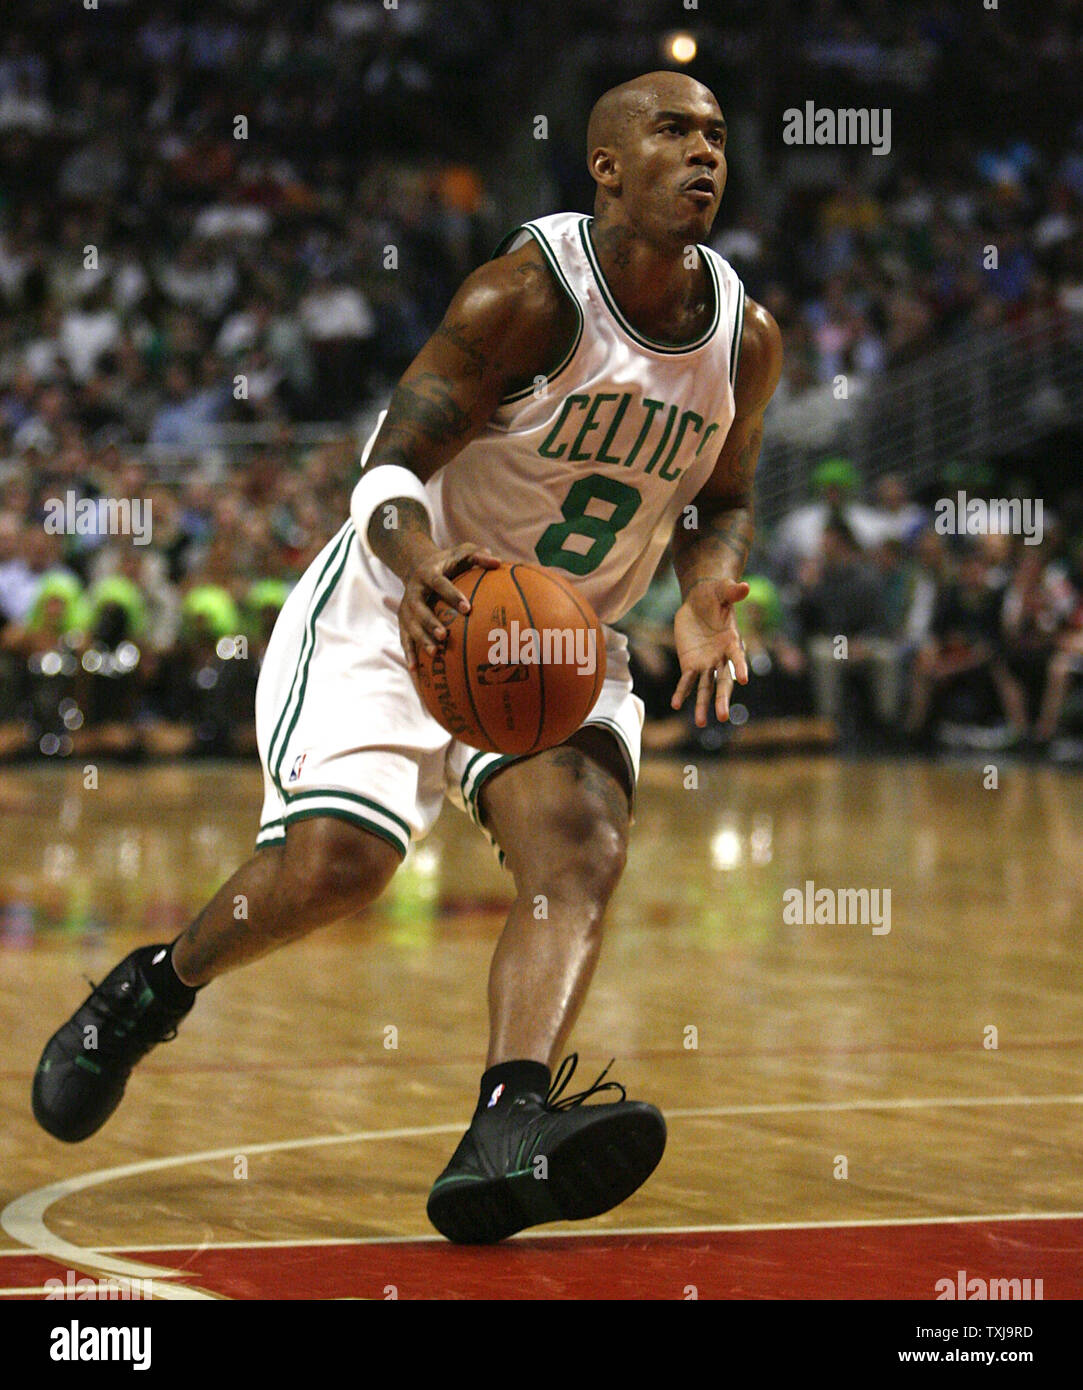 Stephon Marbury of the New Jersey Nets shoots the ball against Brian